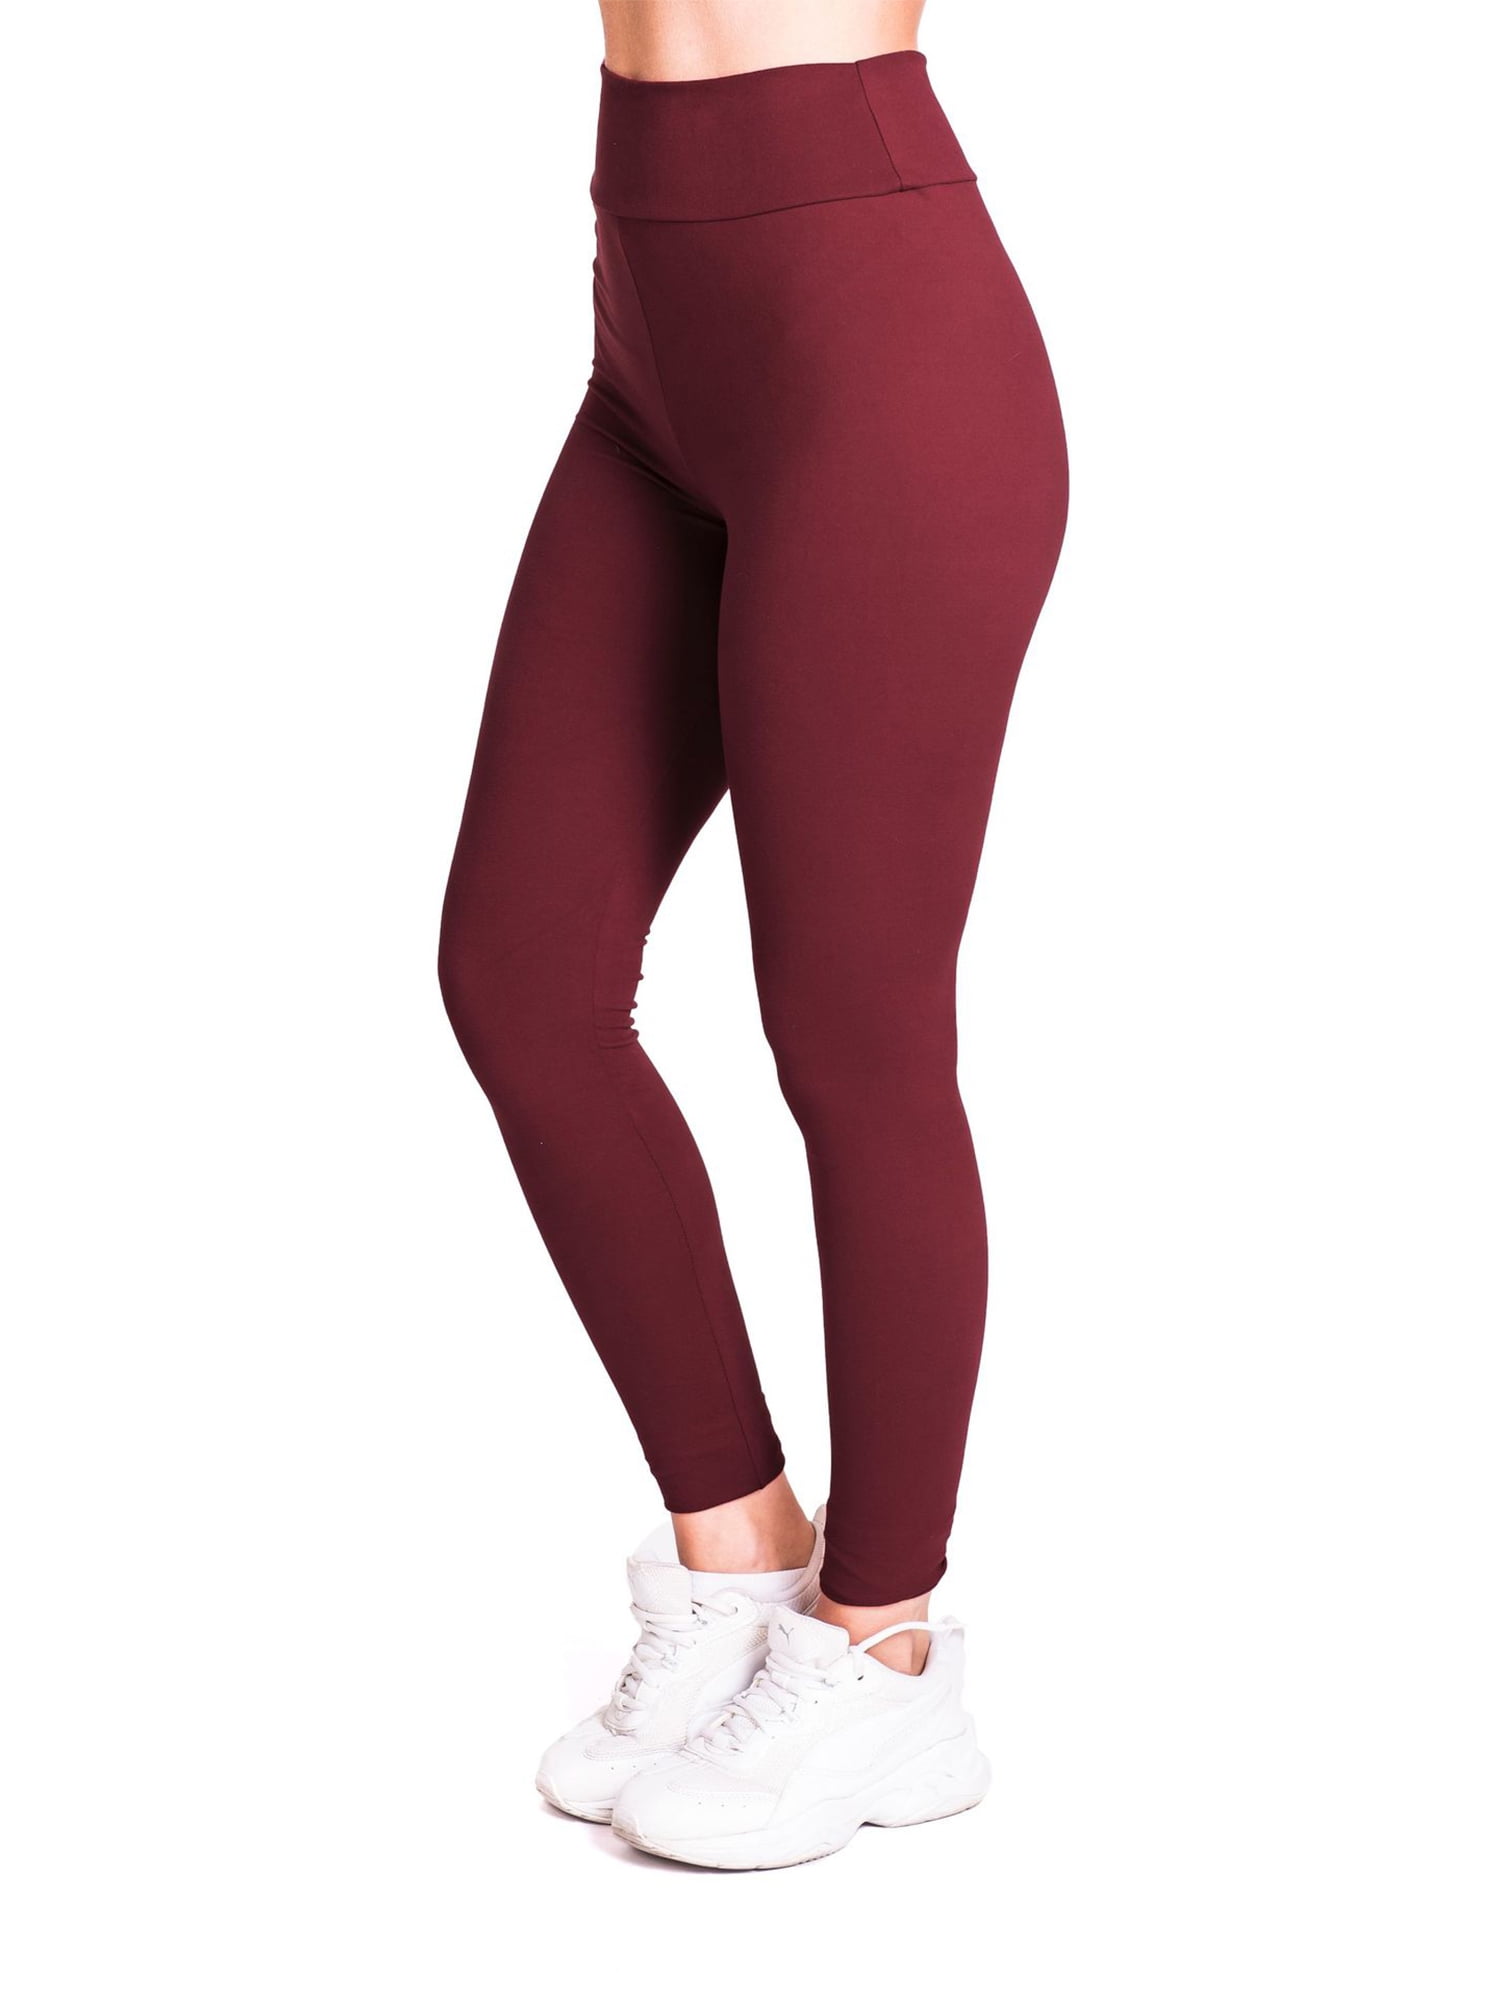 Women's Sexy Shiny Opaque Glossy Leggings Spandex Breathable Tight  Bodybuilding